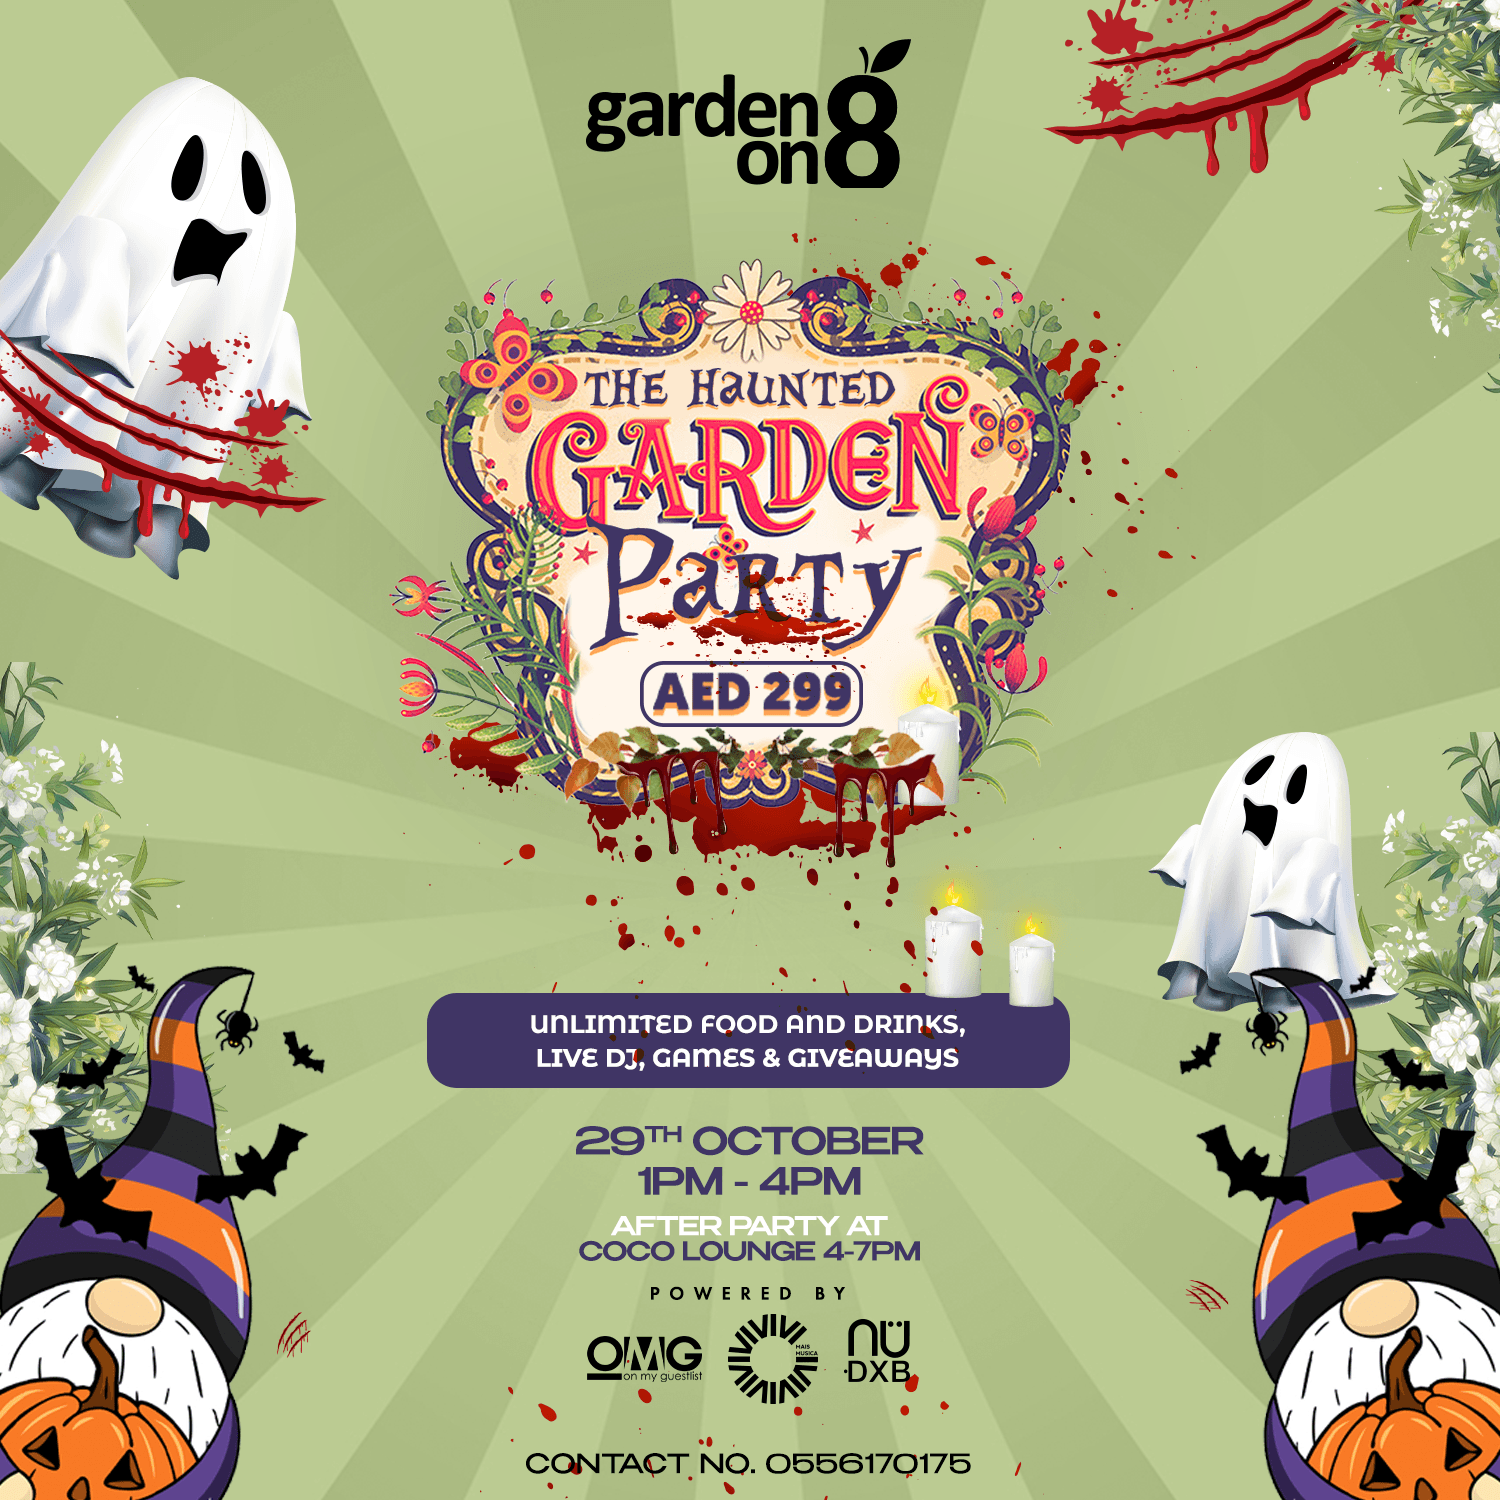 The haunted garden party